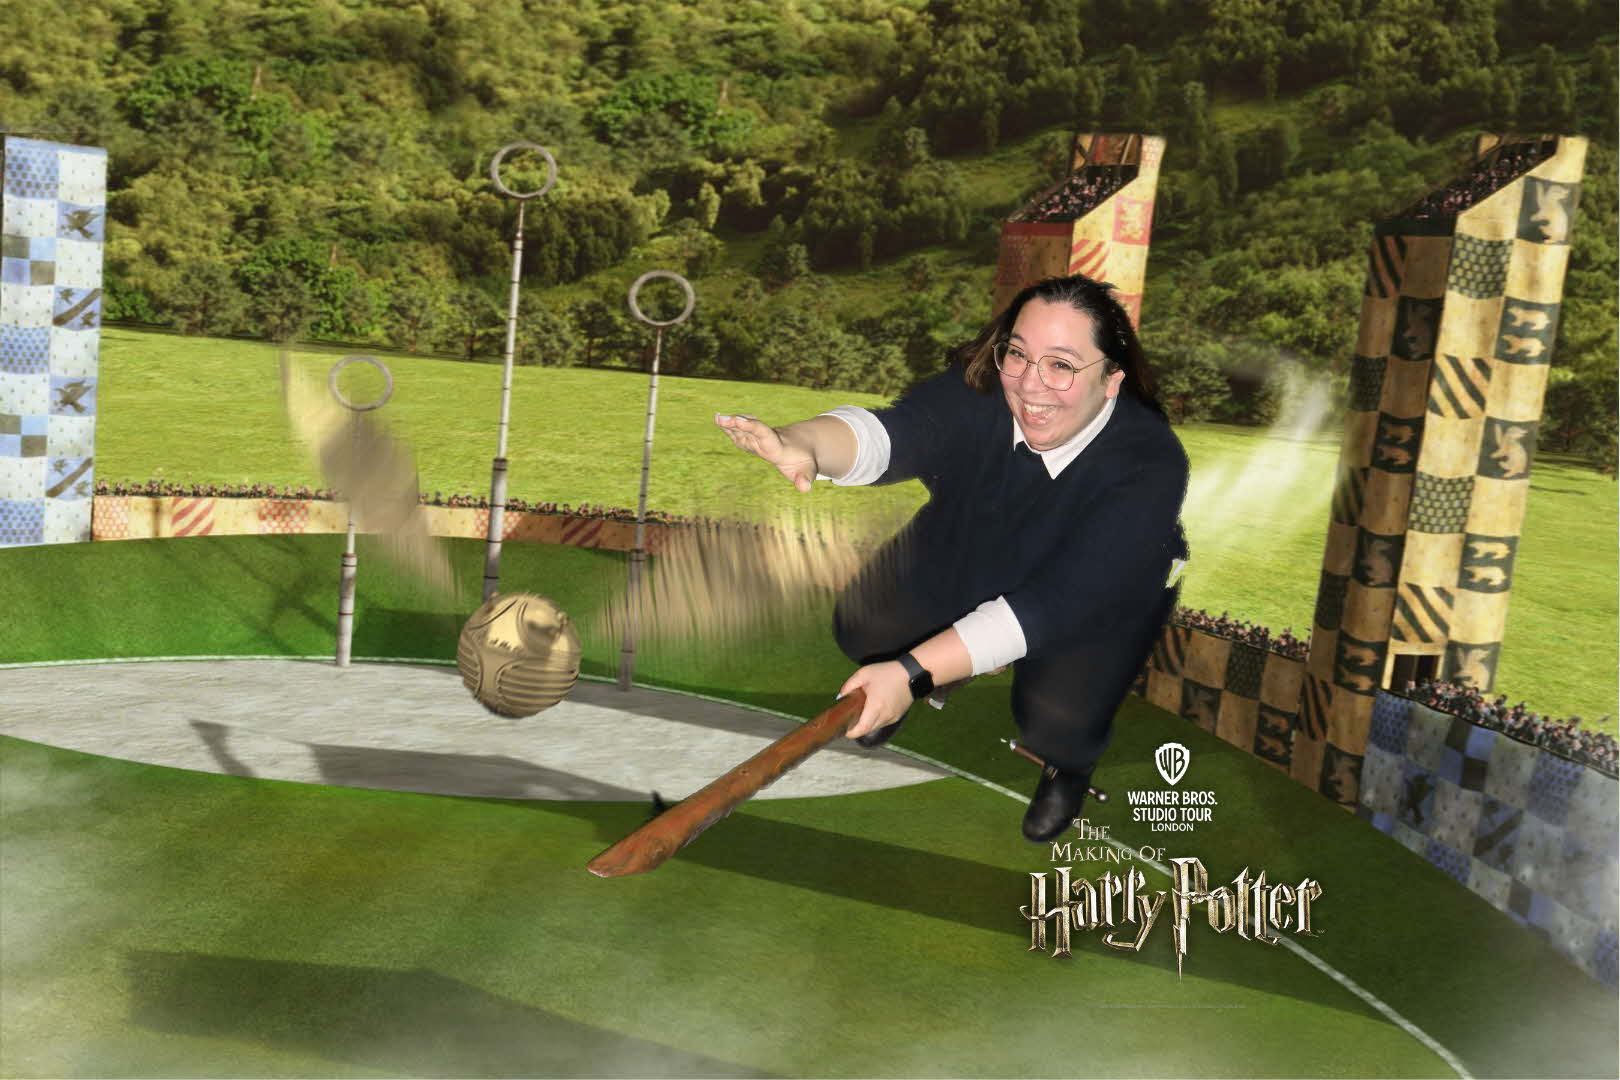 Harry Potter Studio Tour green screen photo of Kim catching the golden snitch